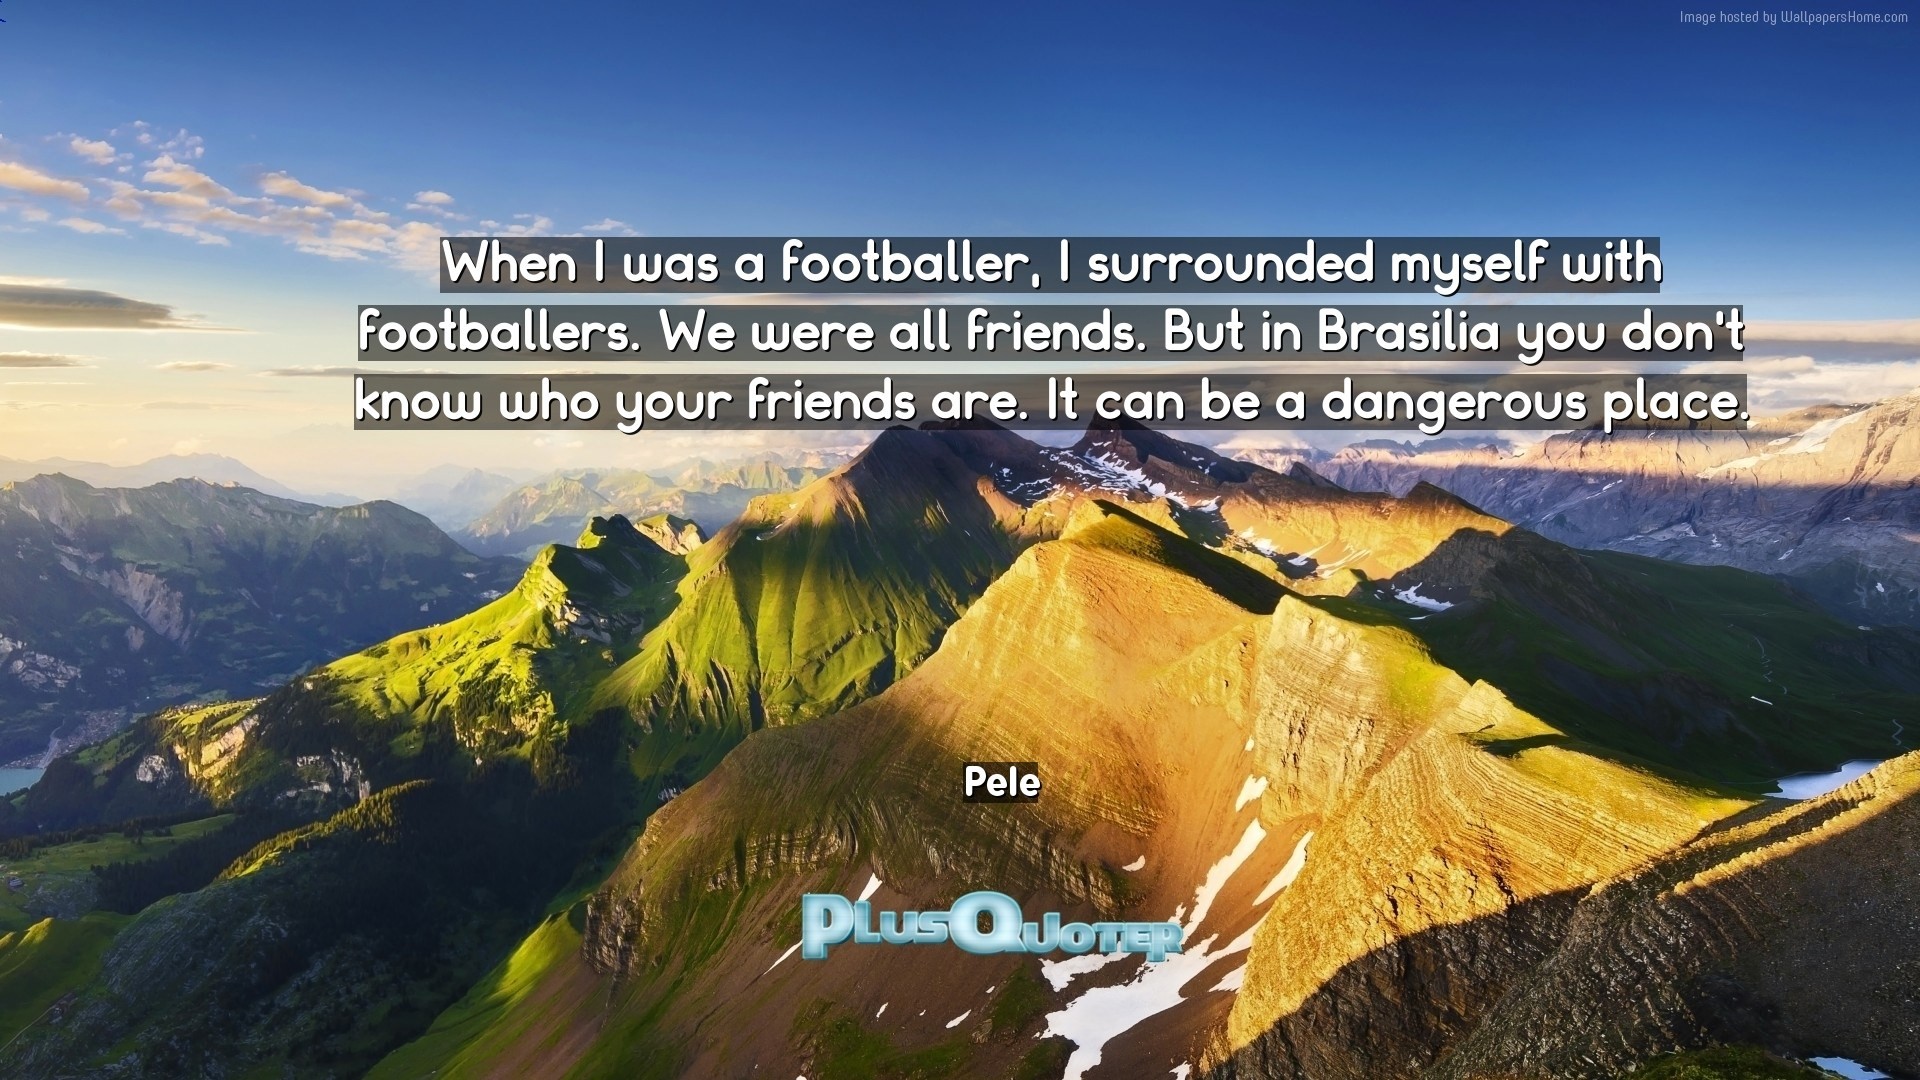 1920x1080 Download Wallpaper with inspirational Quotes- "When I was a footballer, I  surrounded myself